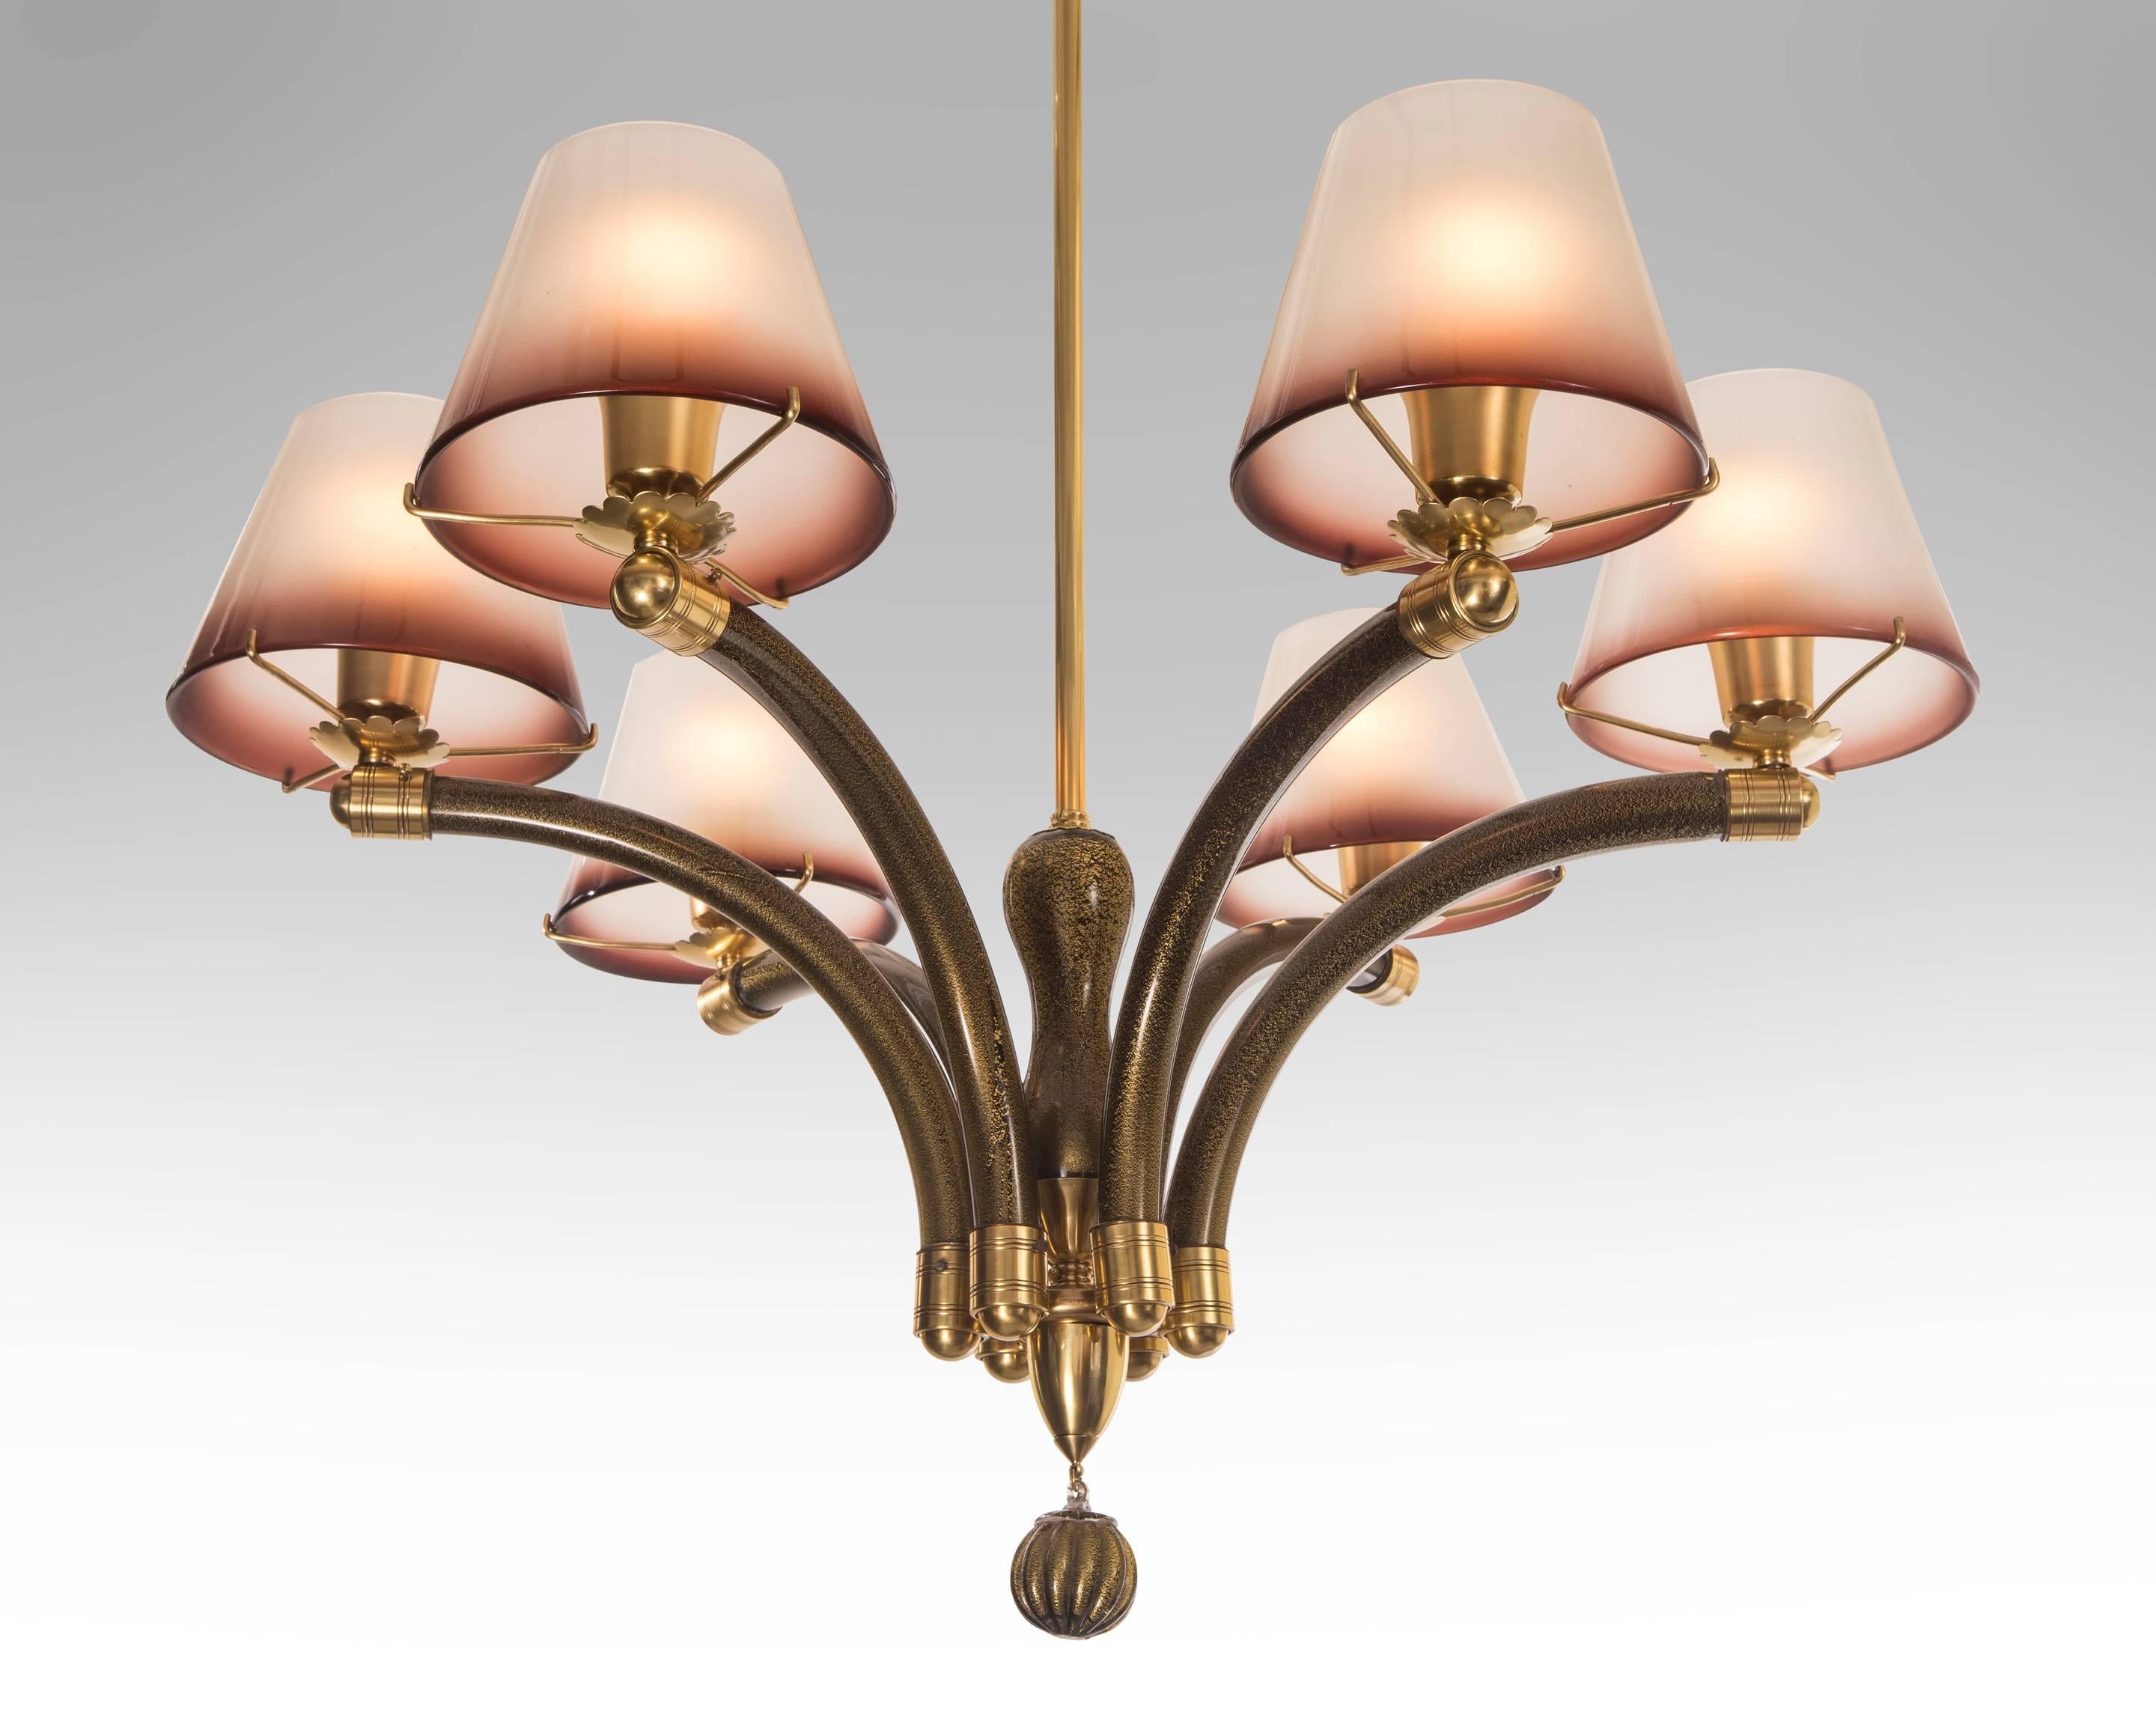 Fratelli Toso, Rare Murano Glass and Brass Six Arm Chandelier
The gold-speckled dark amethyst glass canopy, above hanging rod issuing six gold-speckled dark amethyst arcing arms, each arm holding a single light and conical glass diffuser,